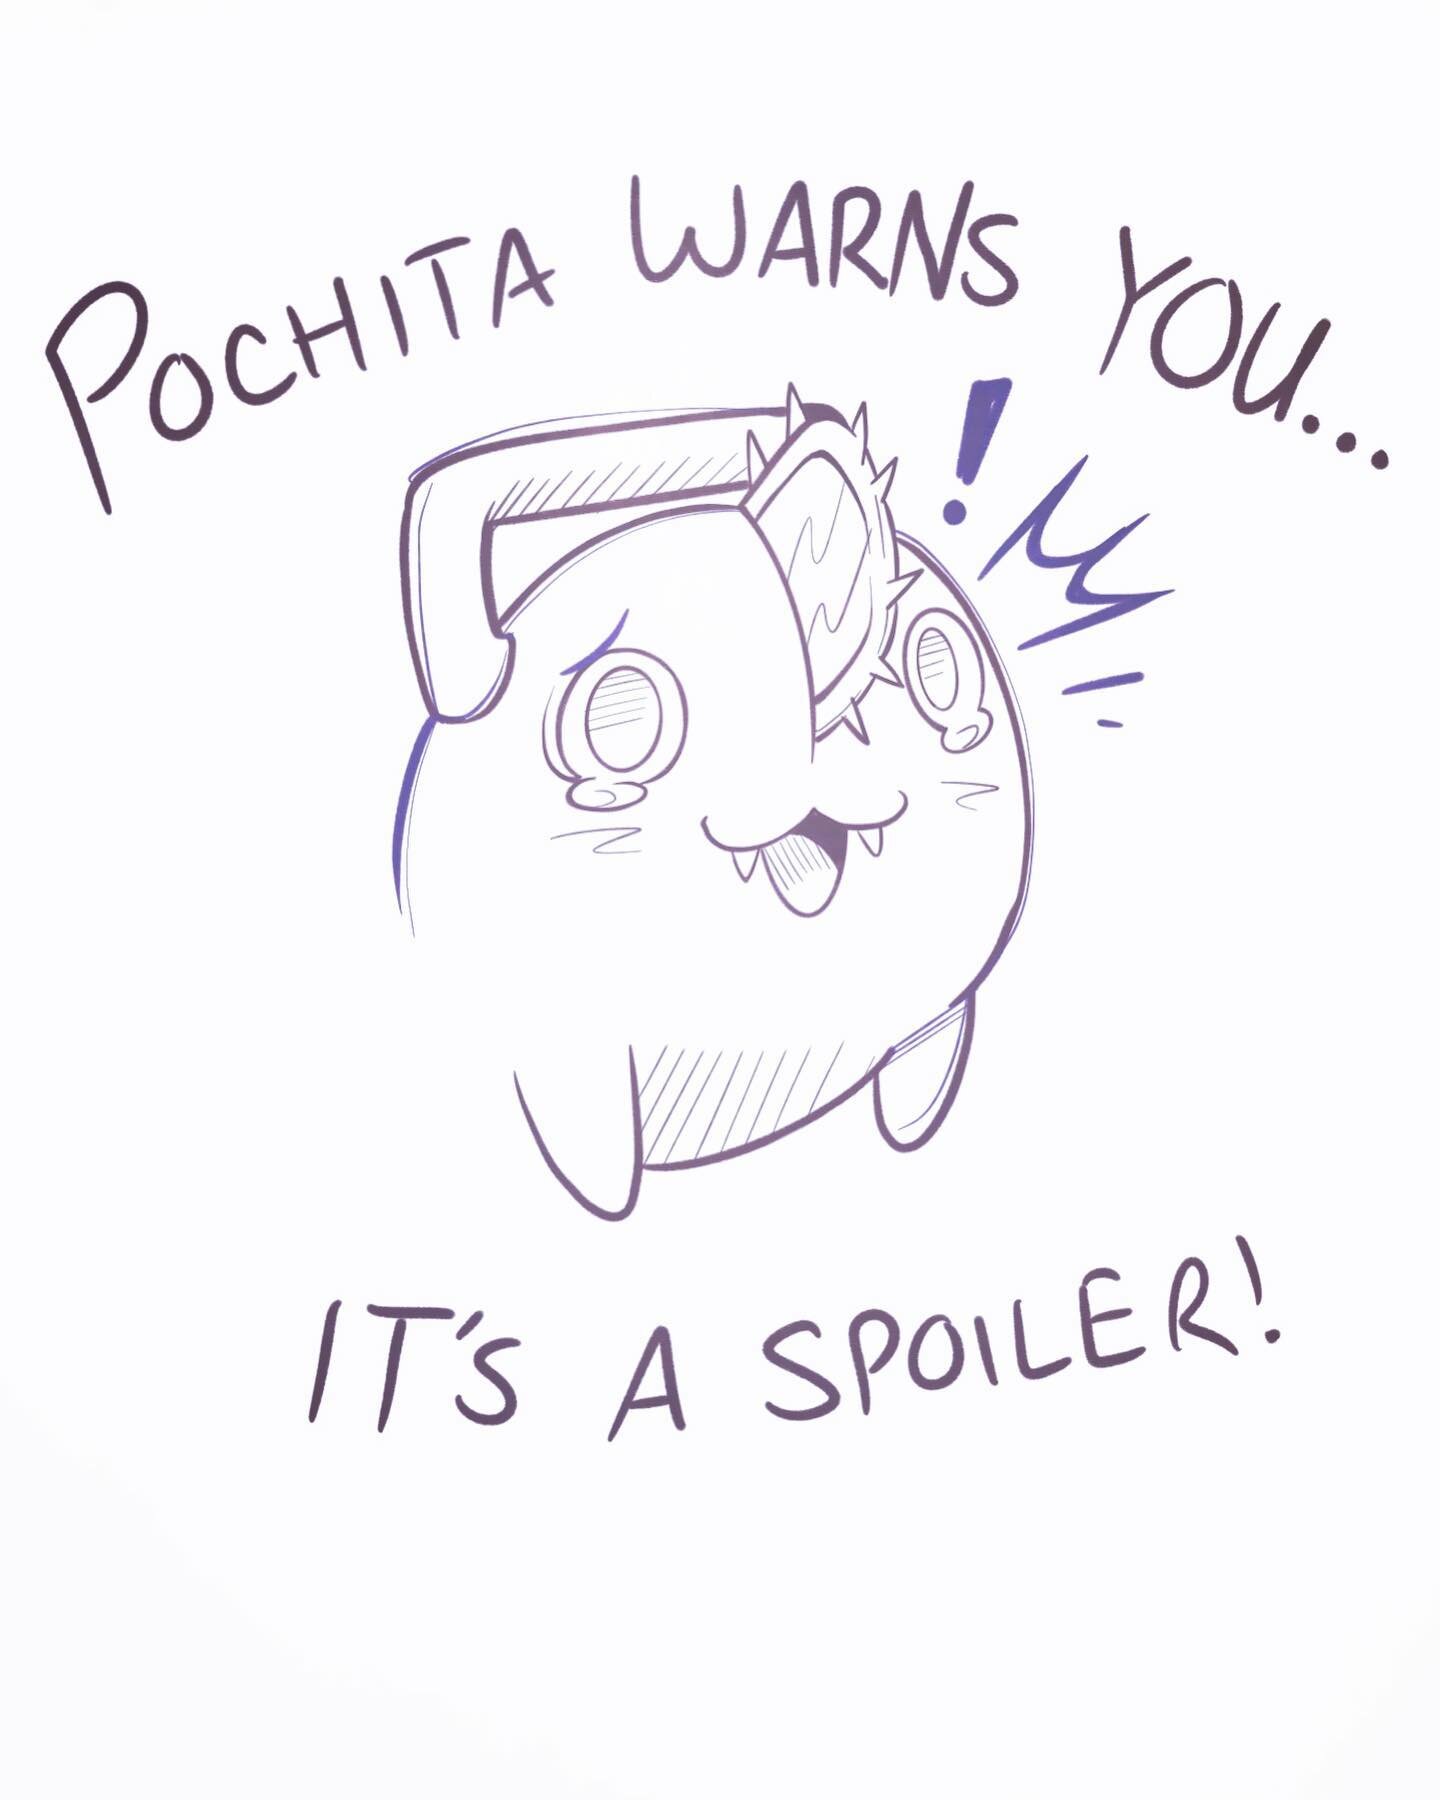 Don&rsquo;t say pochita didn&rsquo;t warn you!
.
.
.
.
*SPOILER*
It&rsquo;s Pochita, from the end of the first part of the chainsaw man Manga! Honestly, I really really had fun doing this, and it&rsquo;s a panel I&rsquo;ve wanted to reference for a p